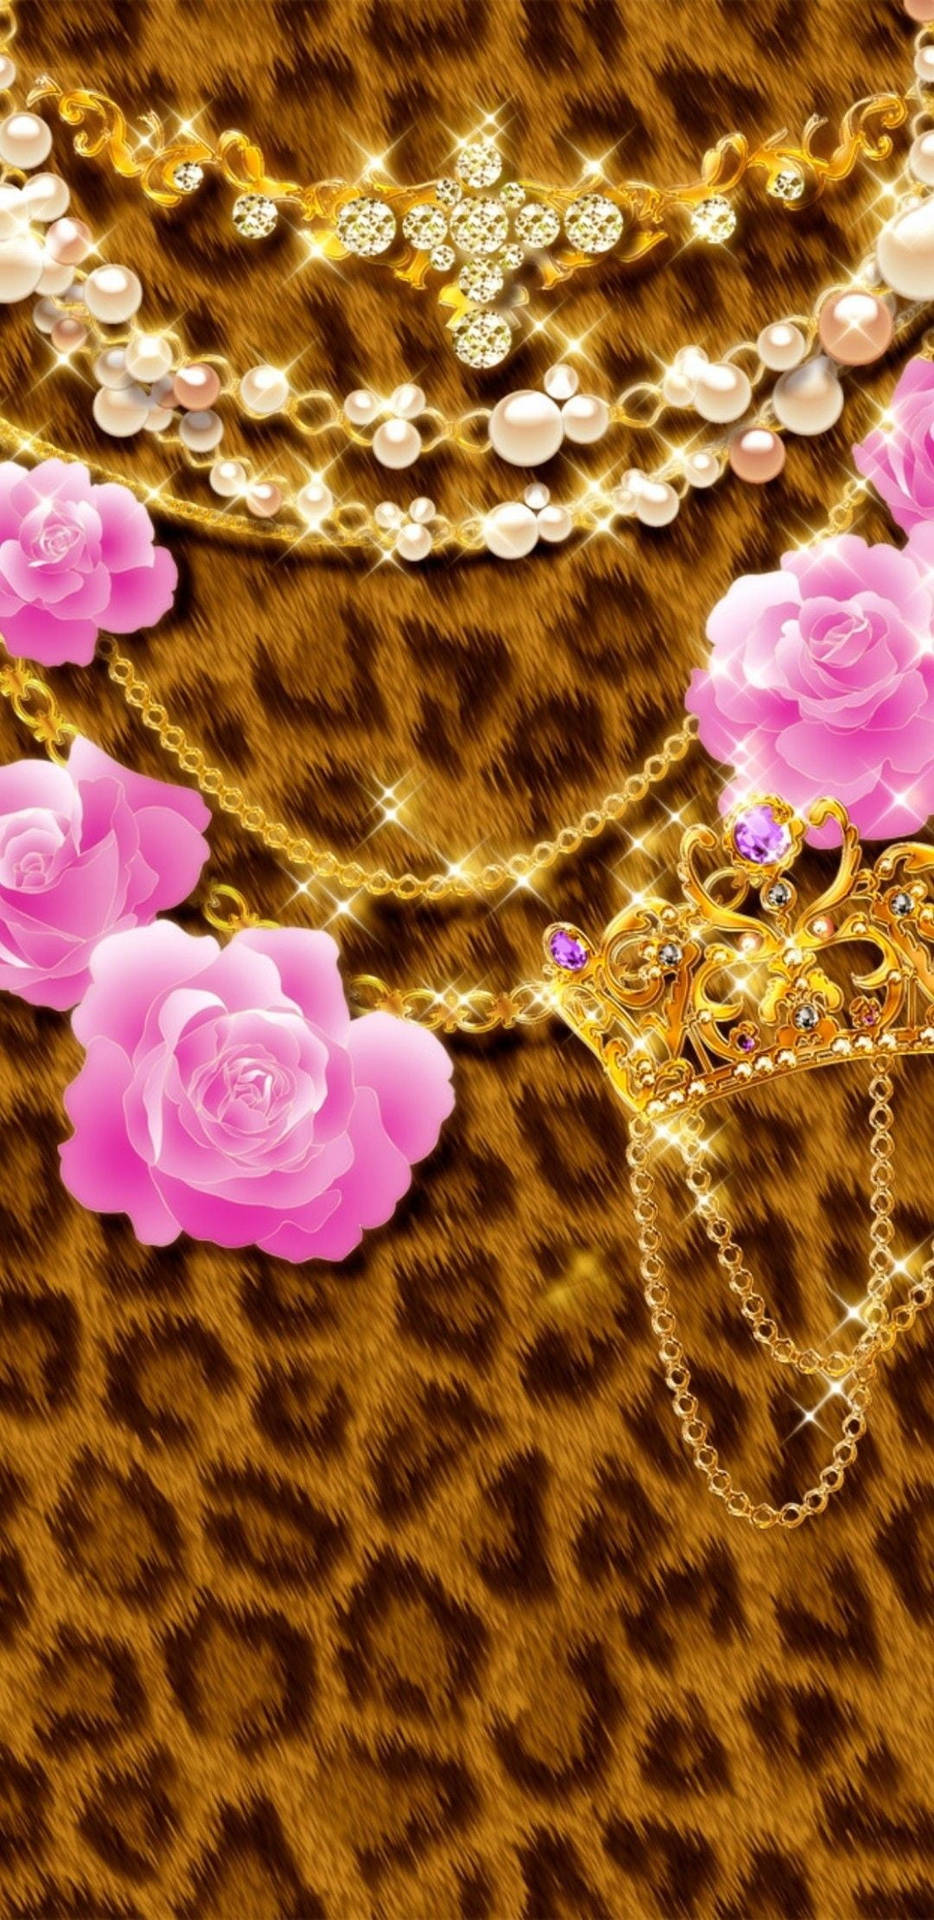 Bling And Flowers Cute Leopard Print